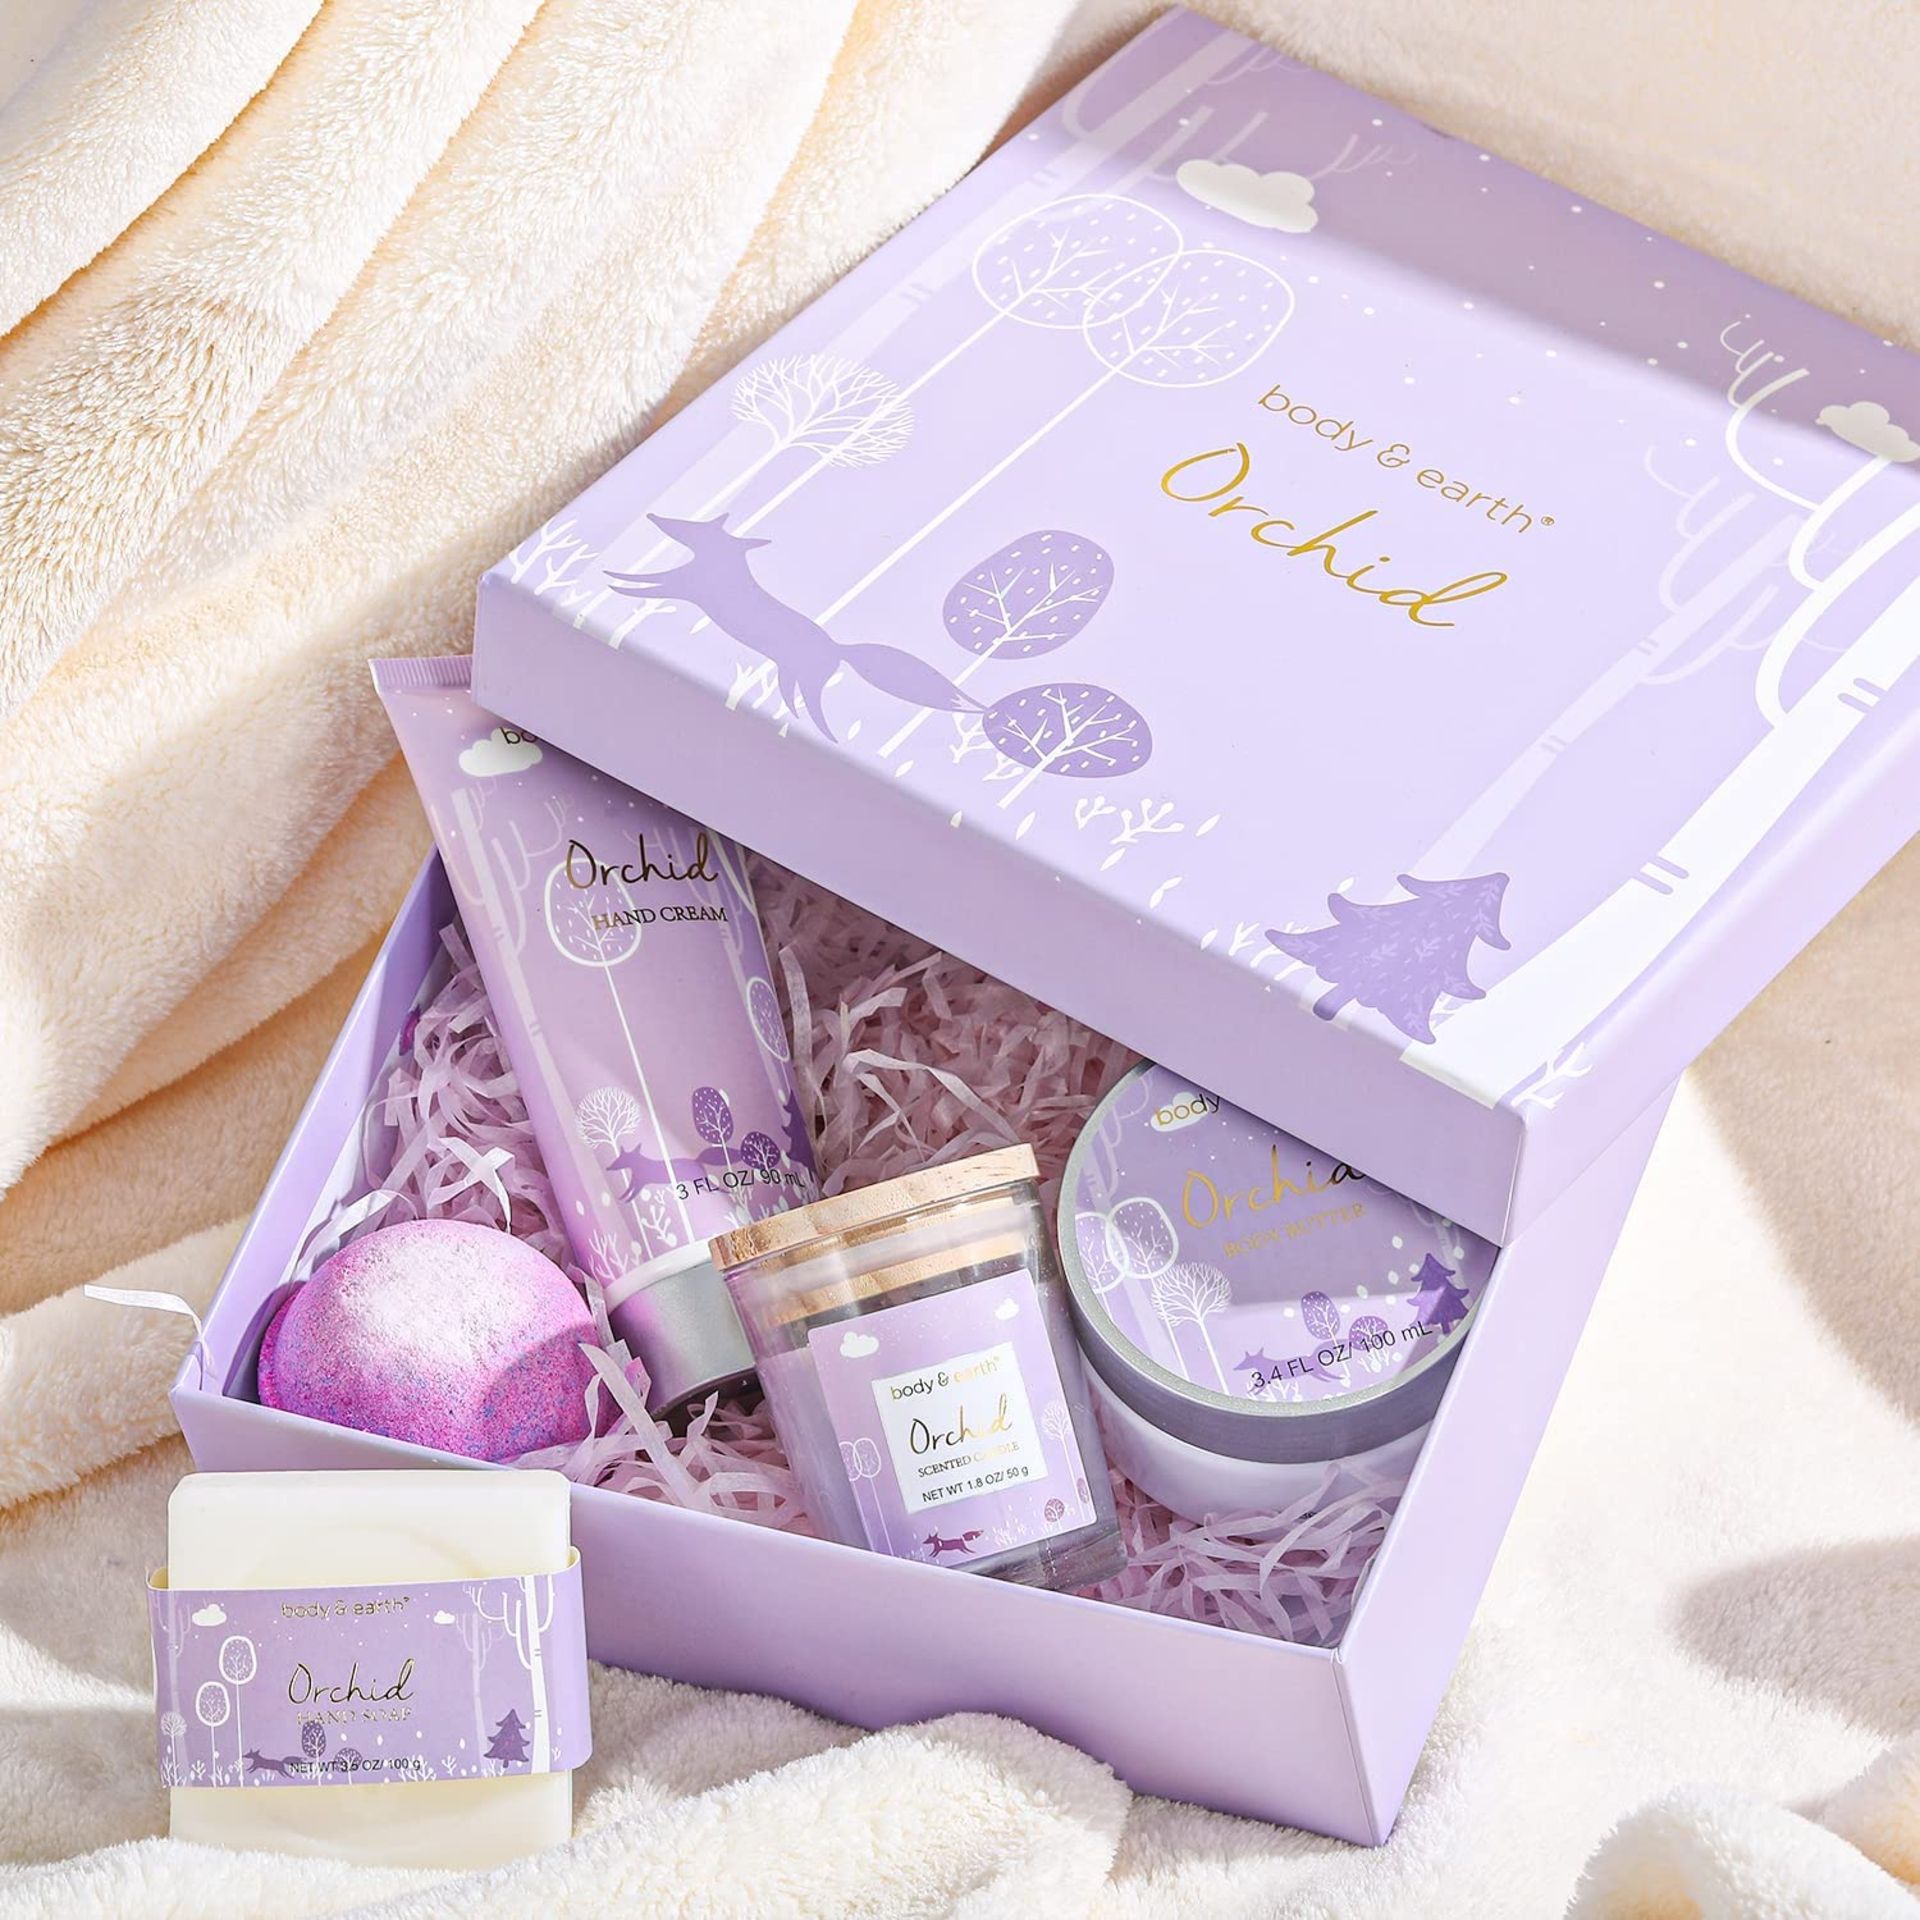 Body & Earth Pamper Gifts for Women, 5 Pcs Orchid Bath Spa Gift Set - Image 2 of 2